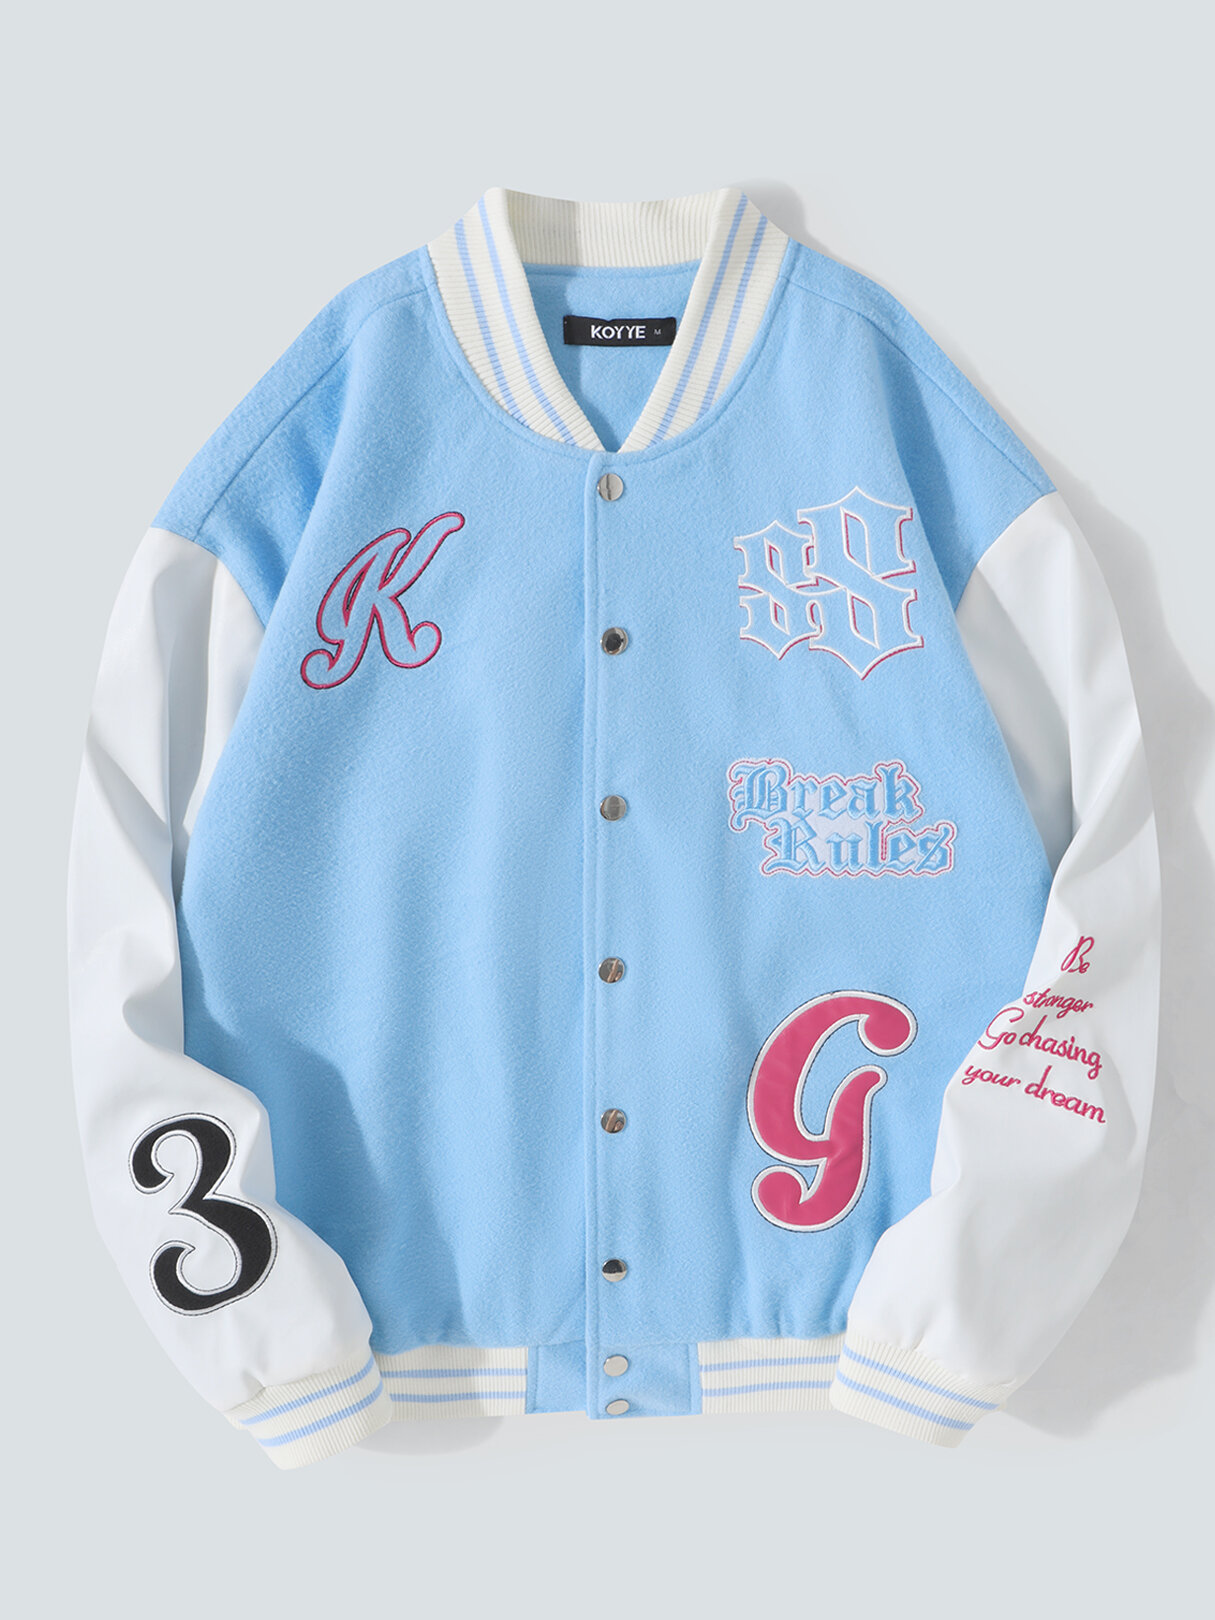 KOYYE Mens Letter Embroidered Patched Snap Button Varsity Baseball Jacket